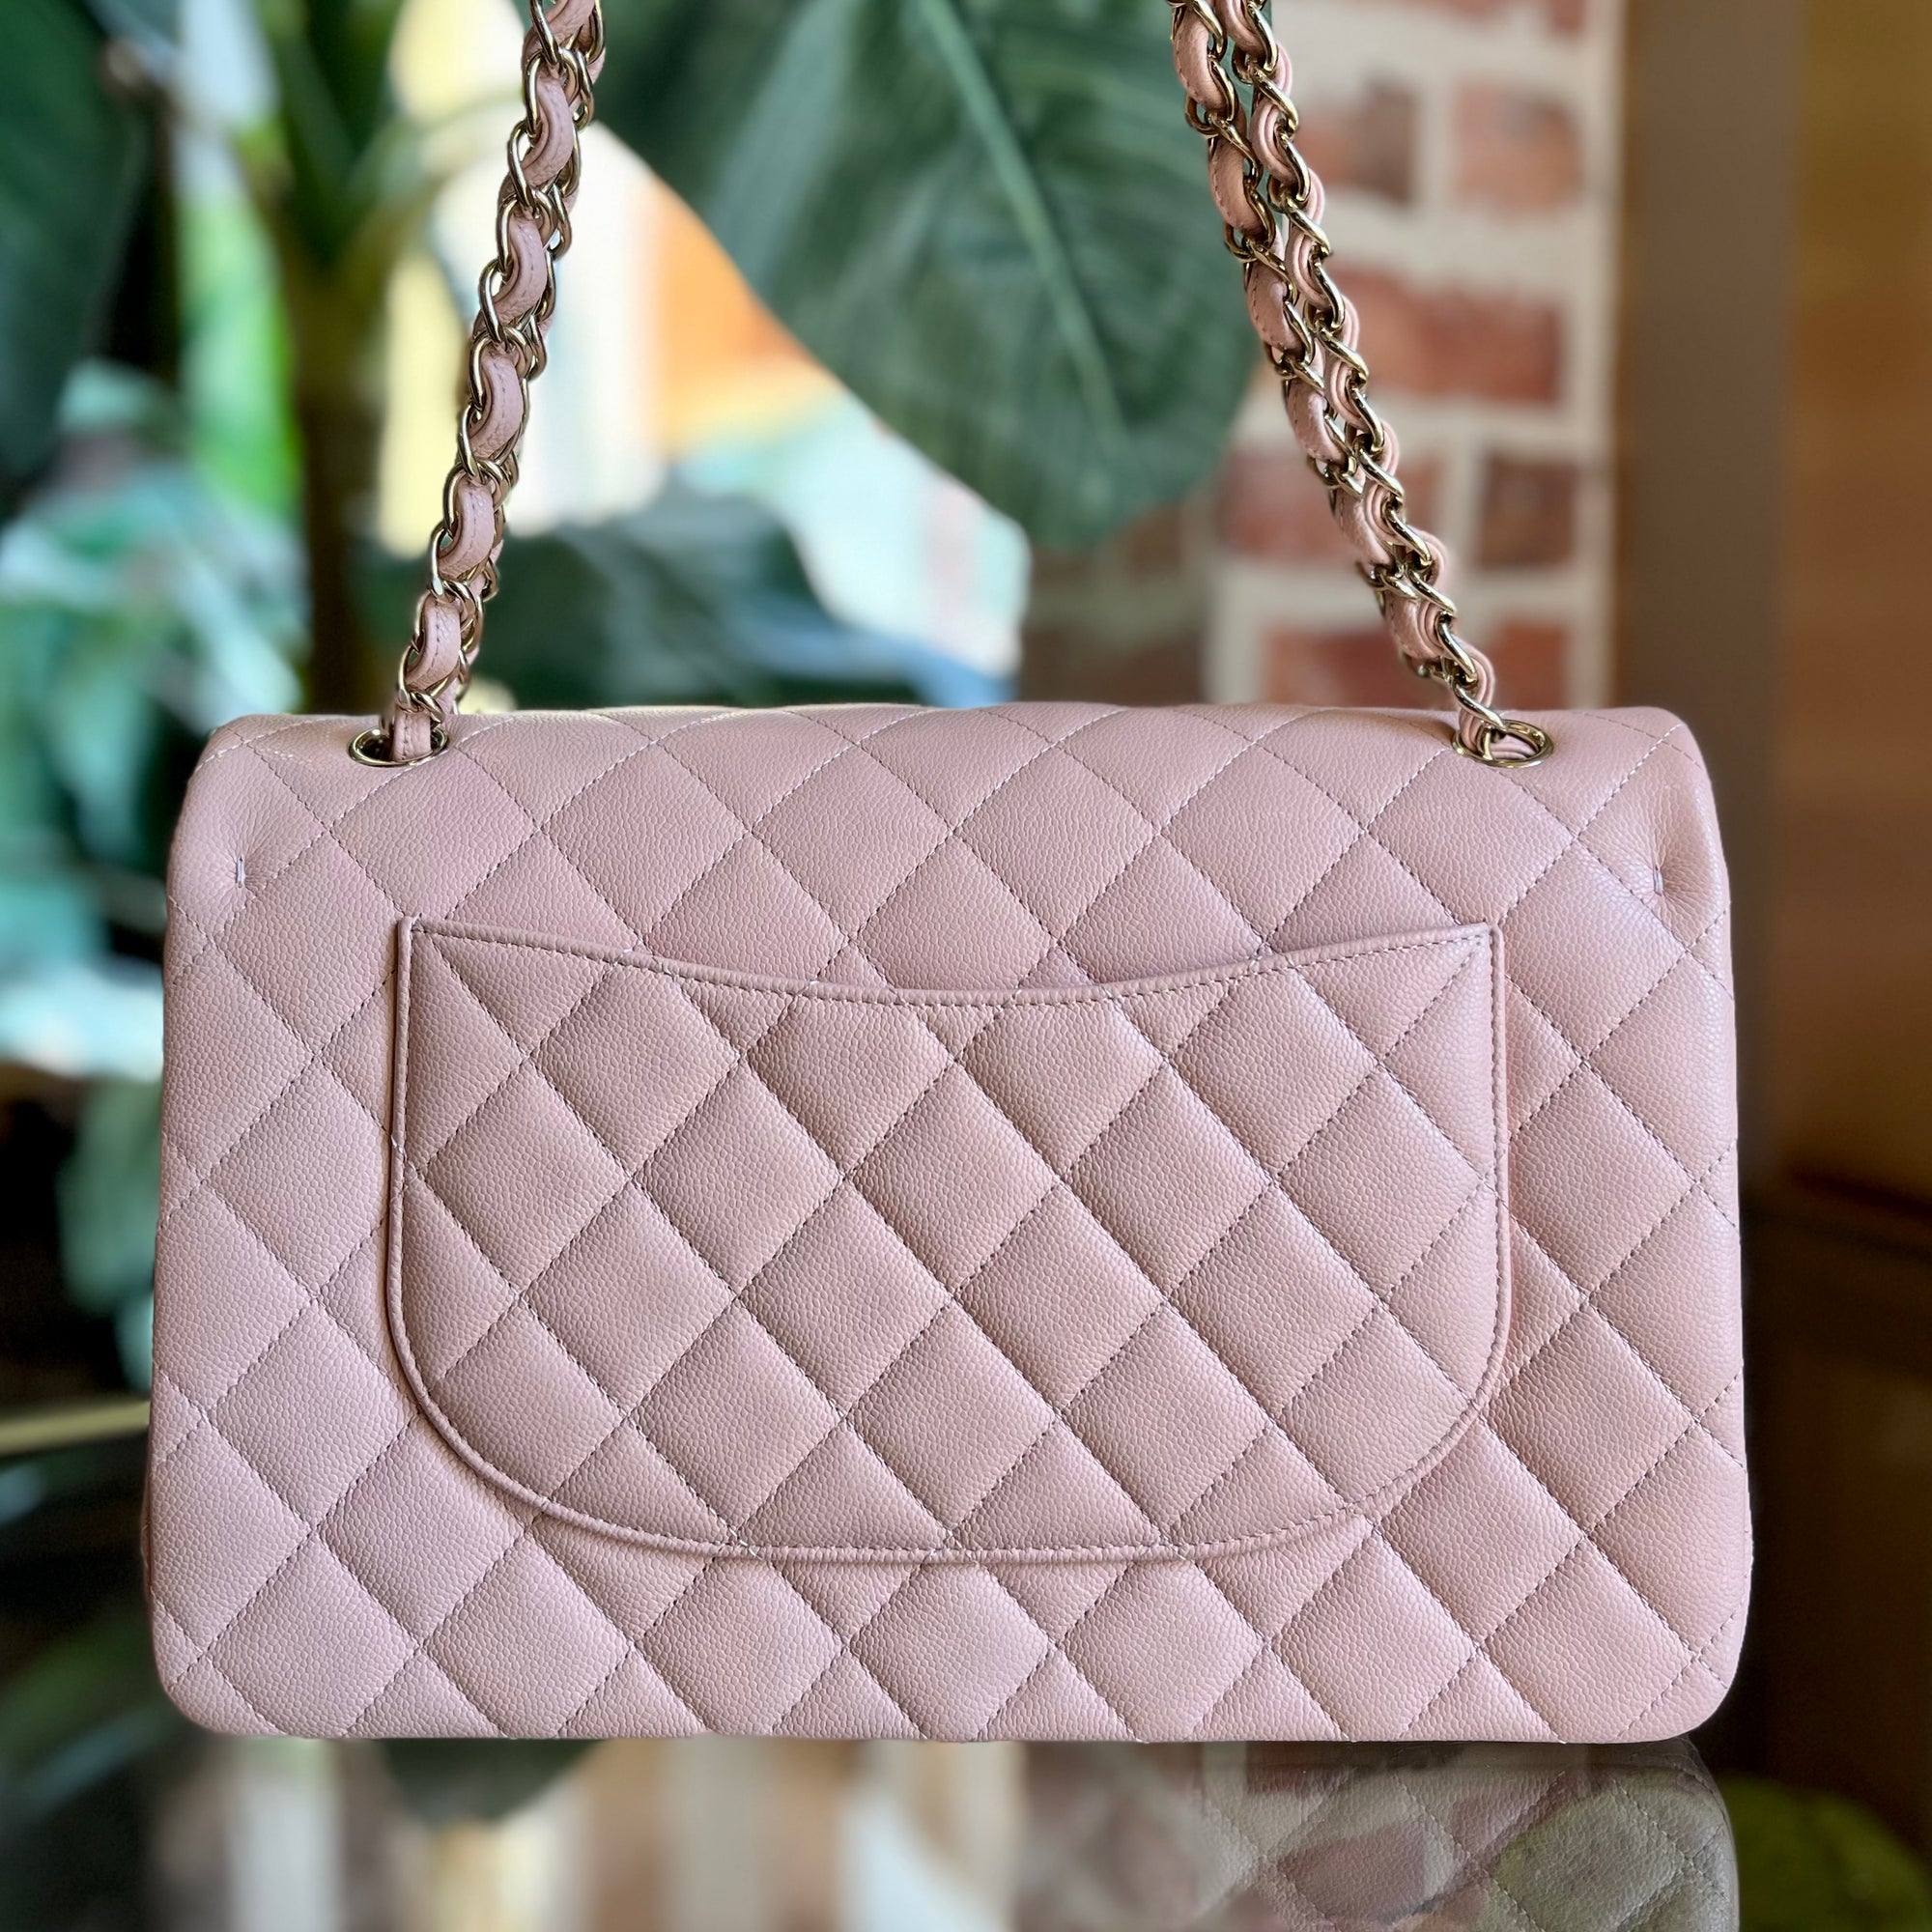 CHANEL Light Pink Caviar Leather Quilted Jumbo Double Flap